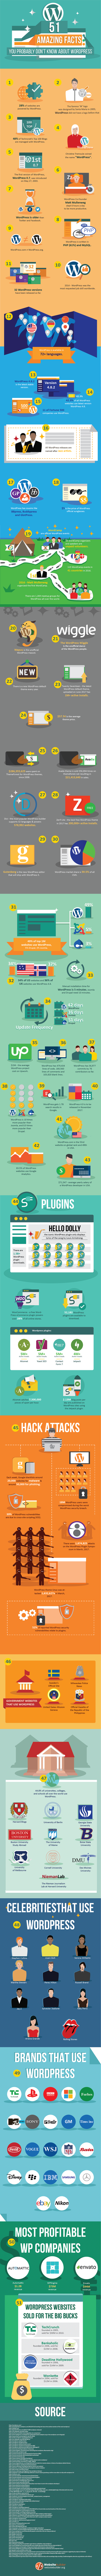 WordPress Infographic | From the blog of Nicholas C. Rossis, author of science fiction, the Pearseus epic fantasy series and children's books